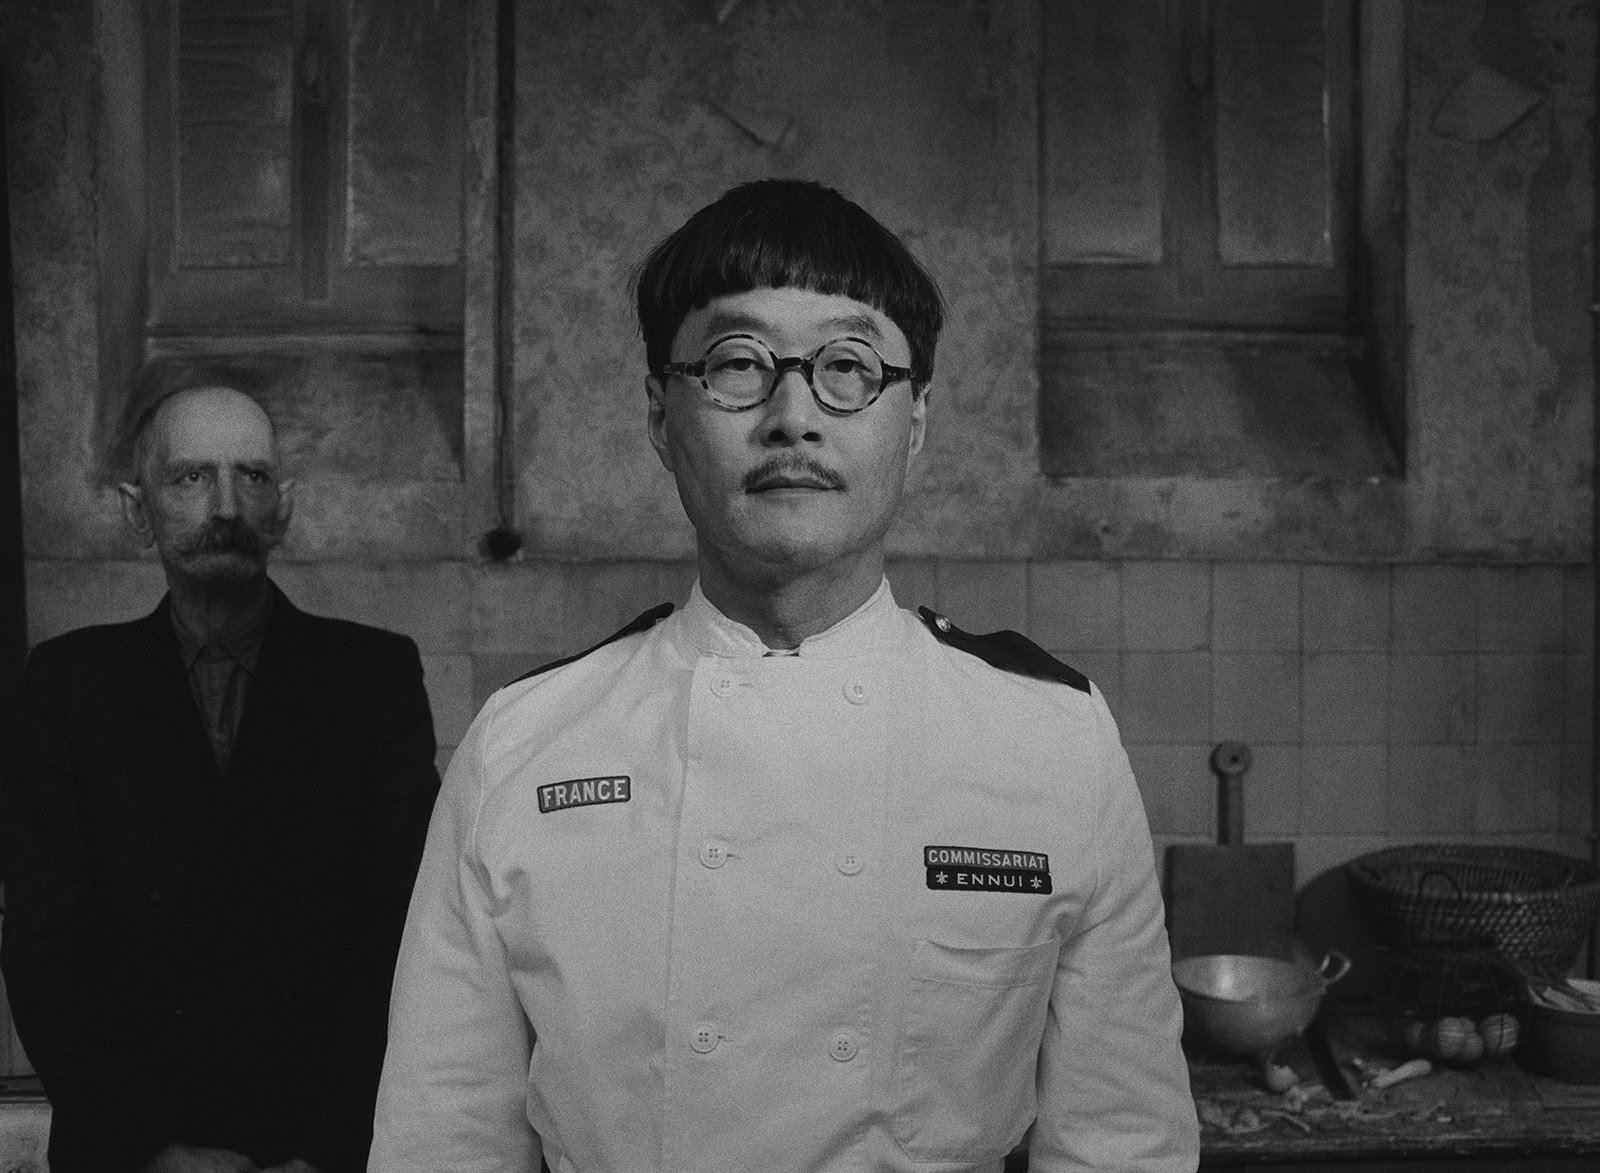 Stephen Park as the chef, Nescaffiere, in The French Dispatch. Image © Searchlight Pictures